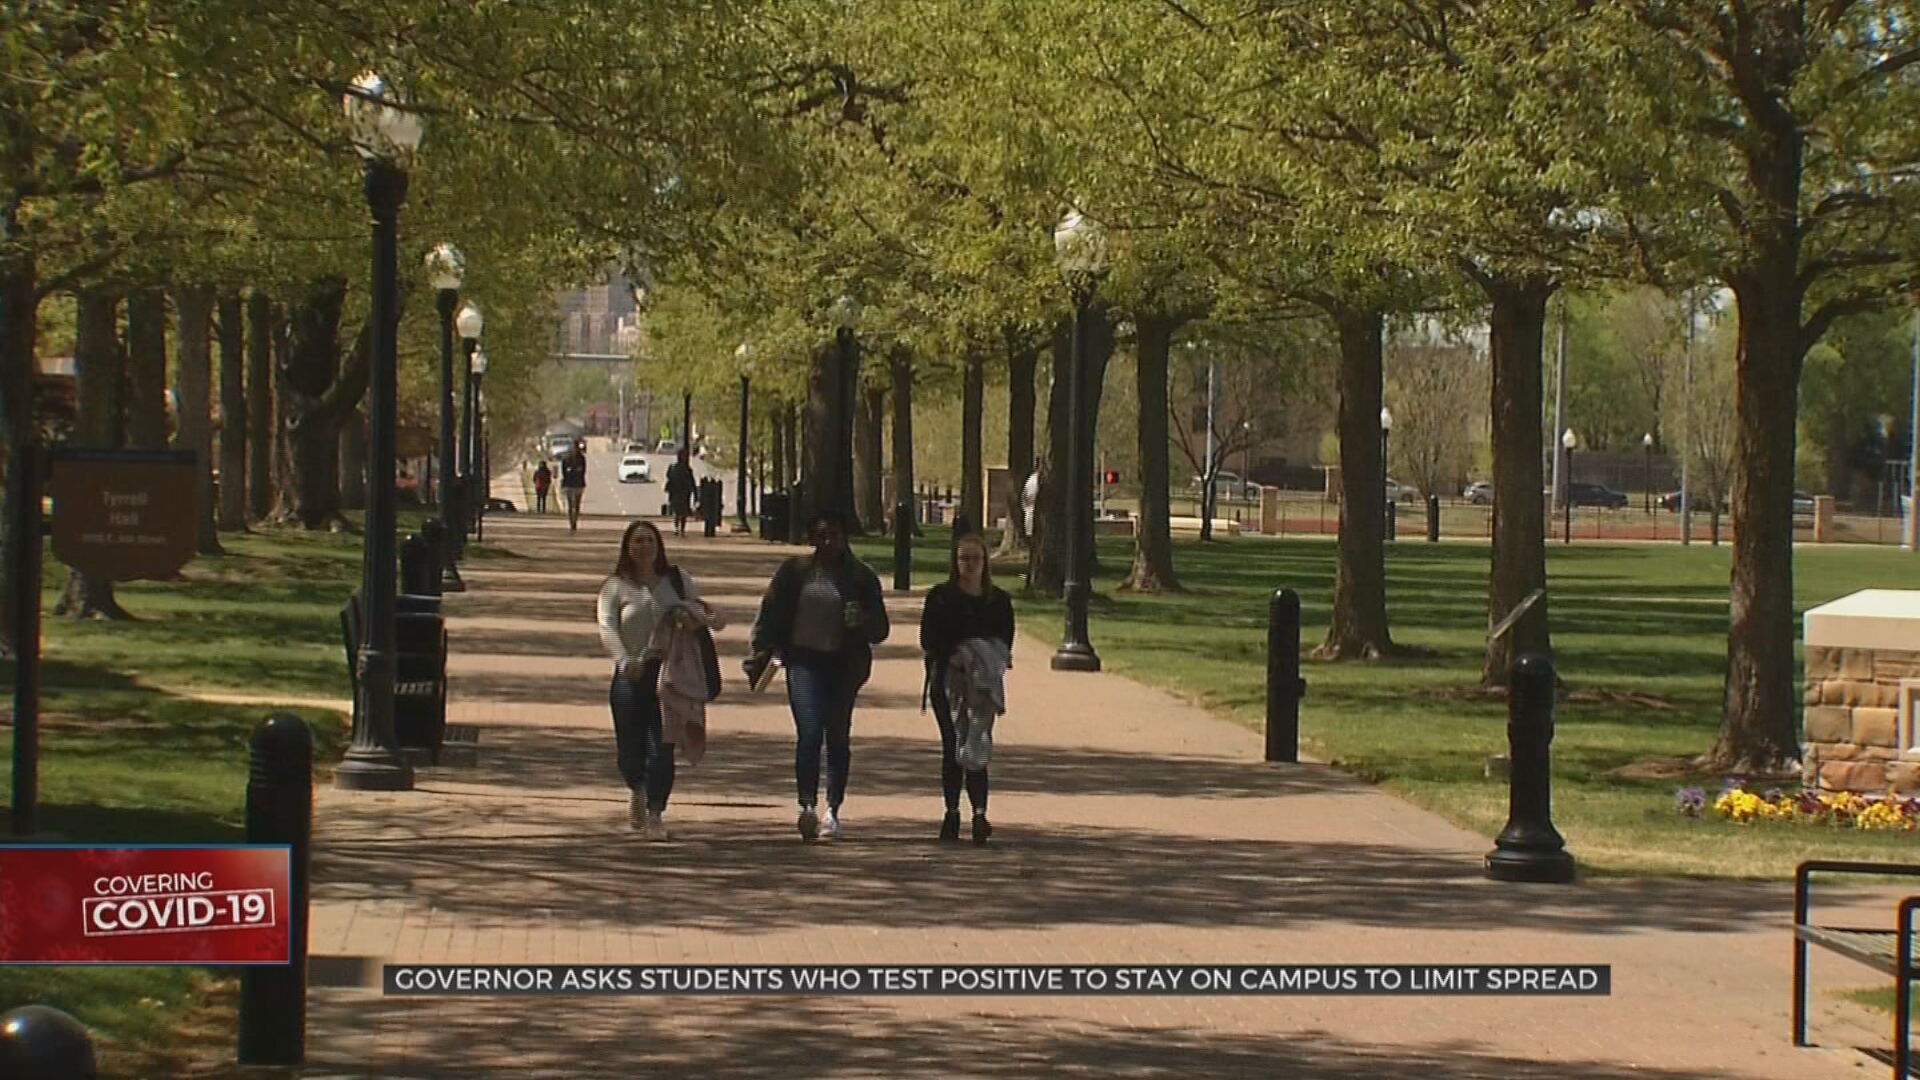 Governor, Colleges Encourage Students To Stay On Campus To Slow COVID-19 Spread